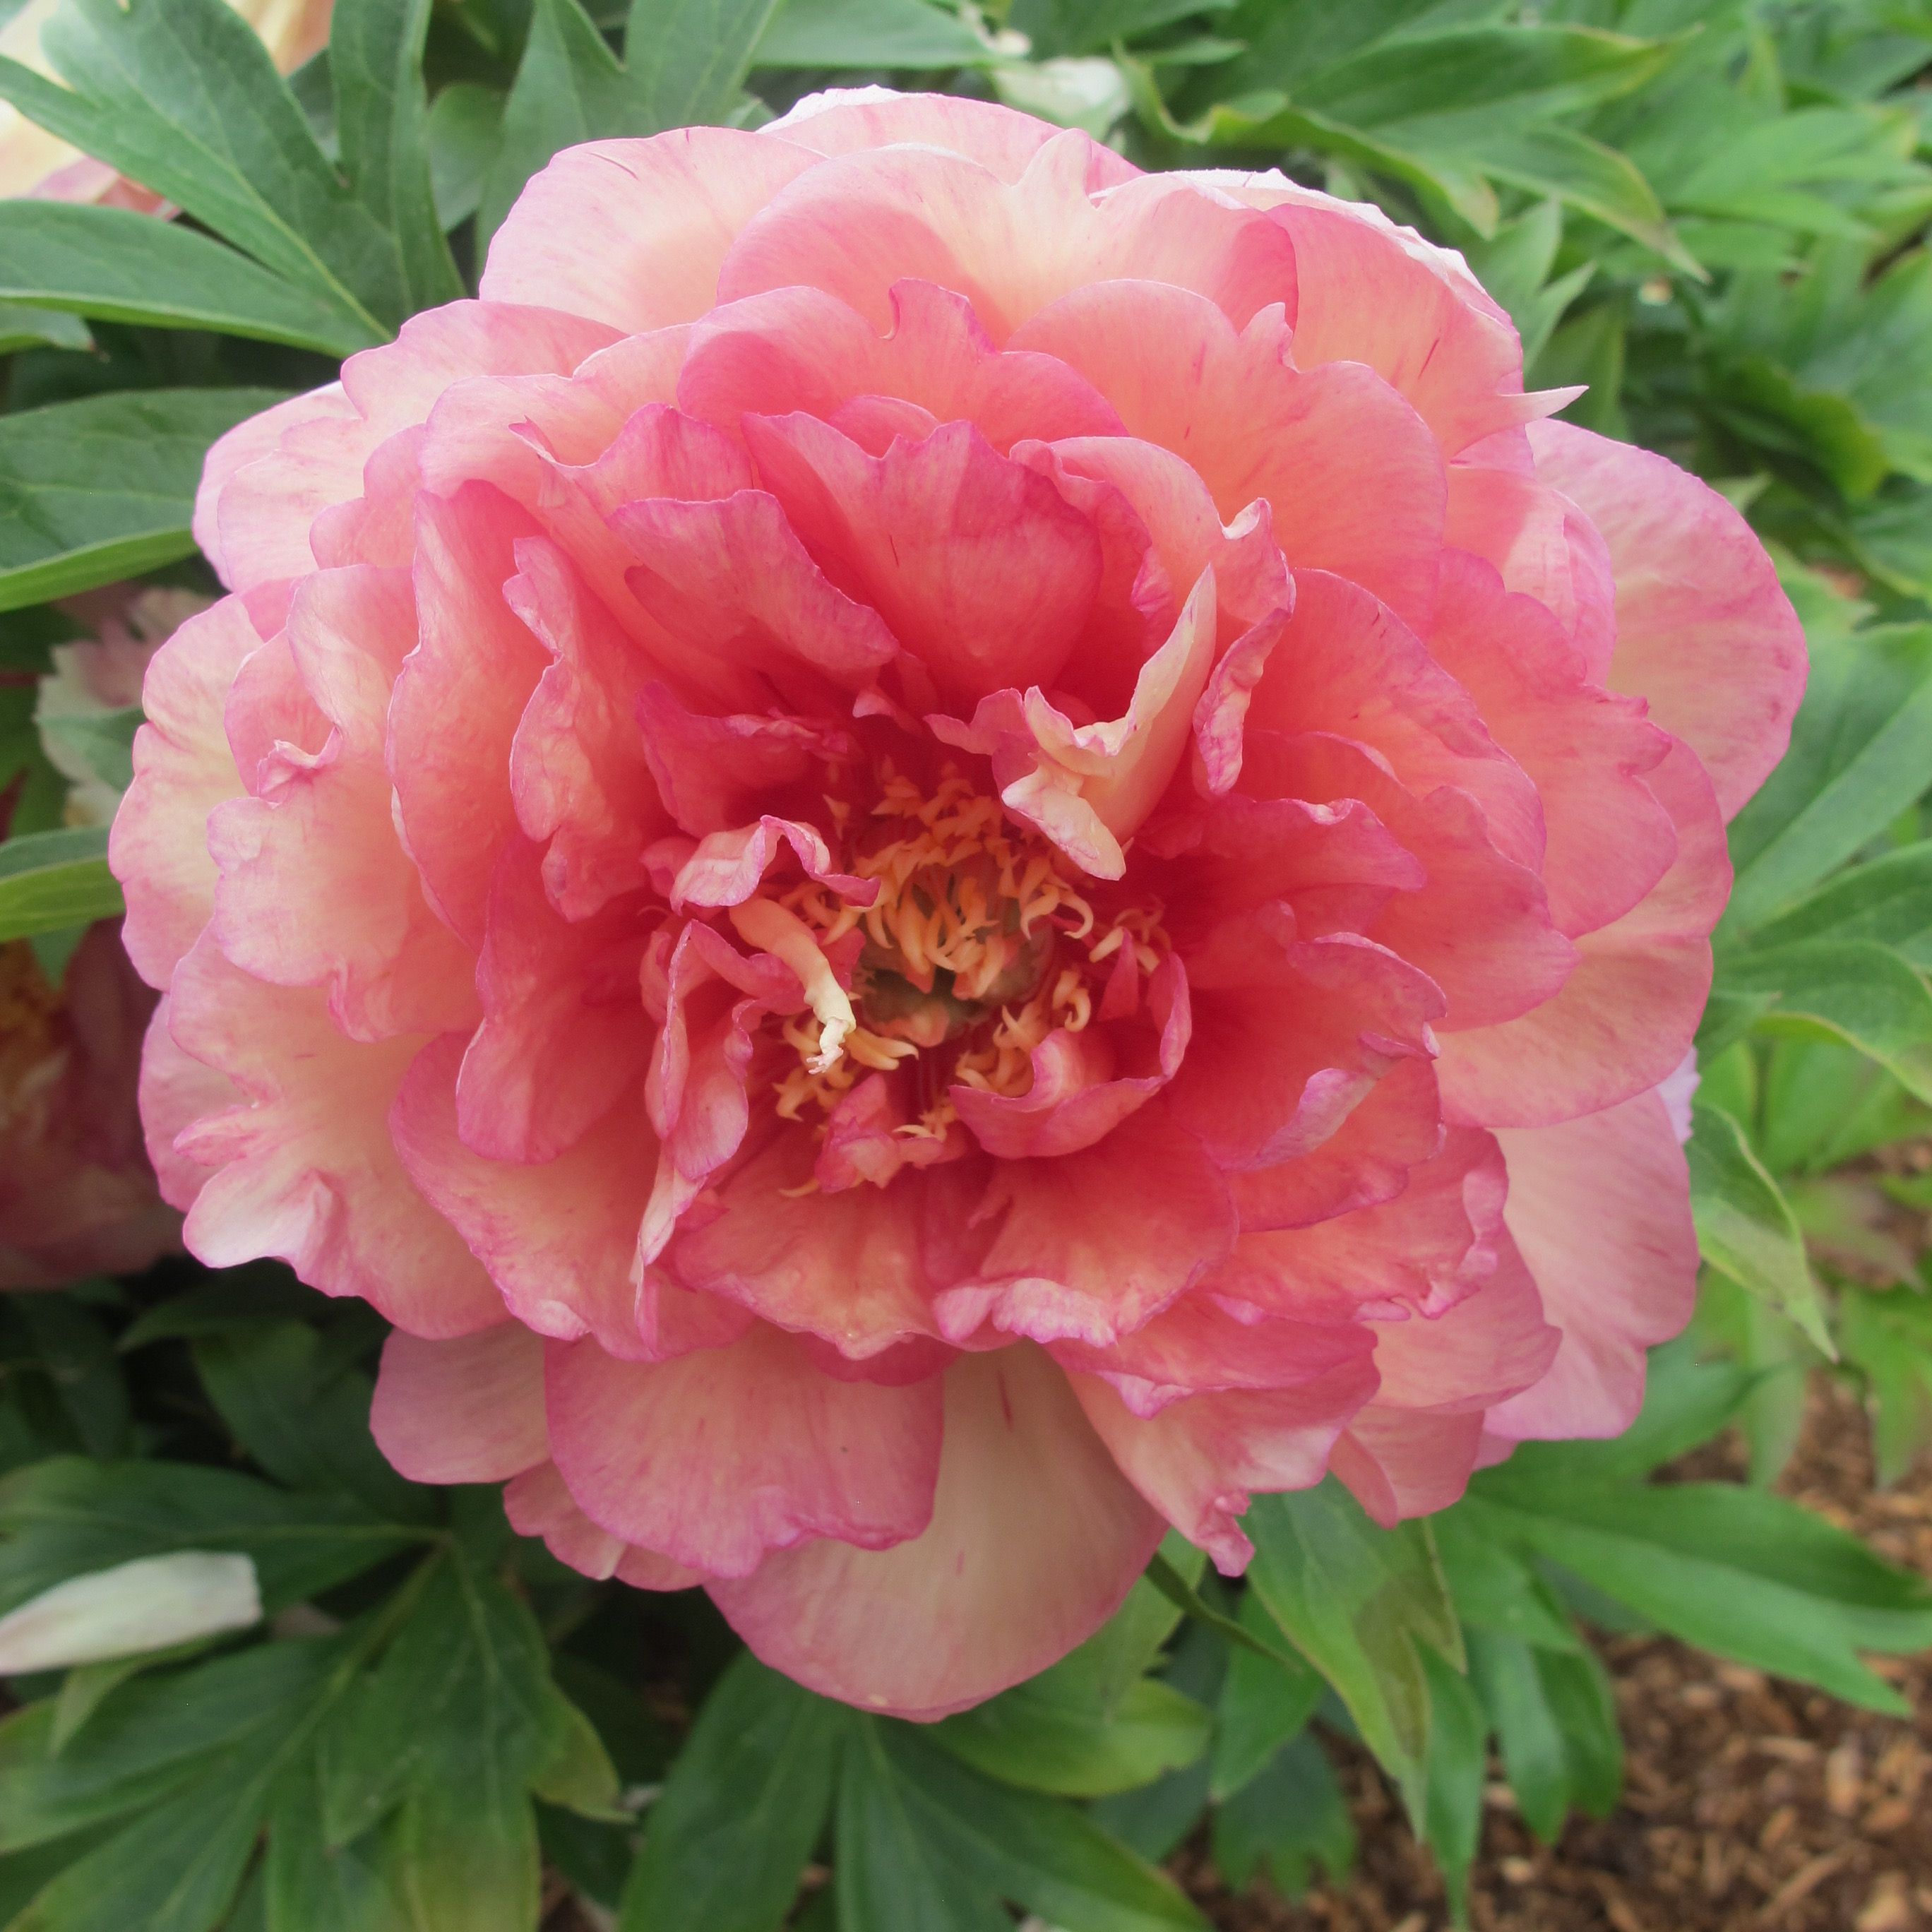 images/plants/paeonia/pae-truly-scrumptious/pae-truly-scrumptious-0006.JPG